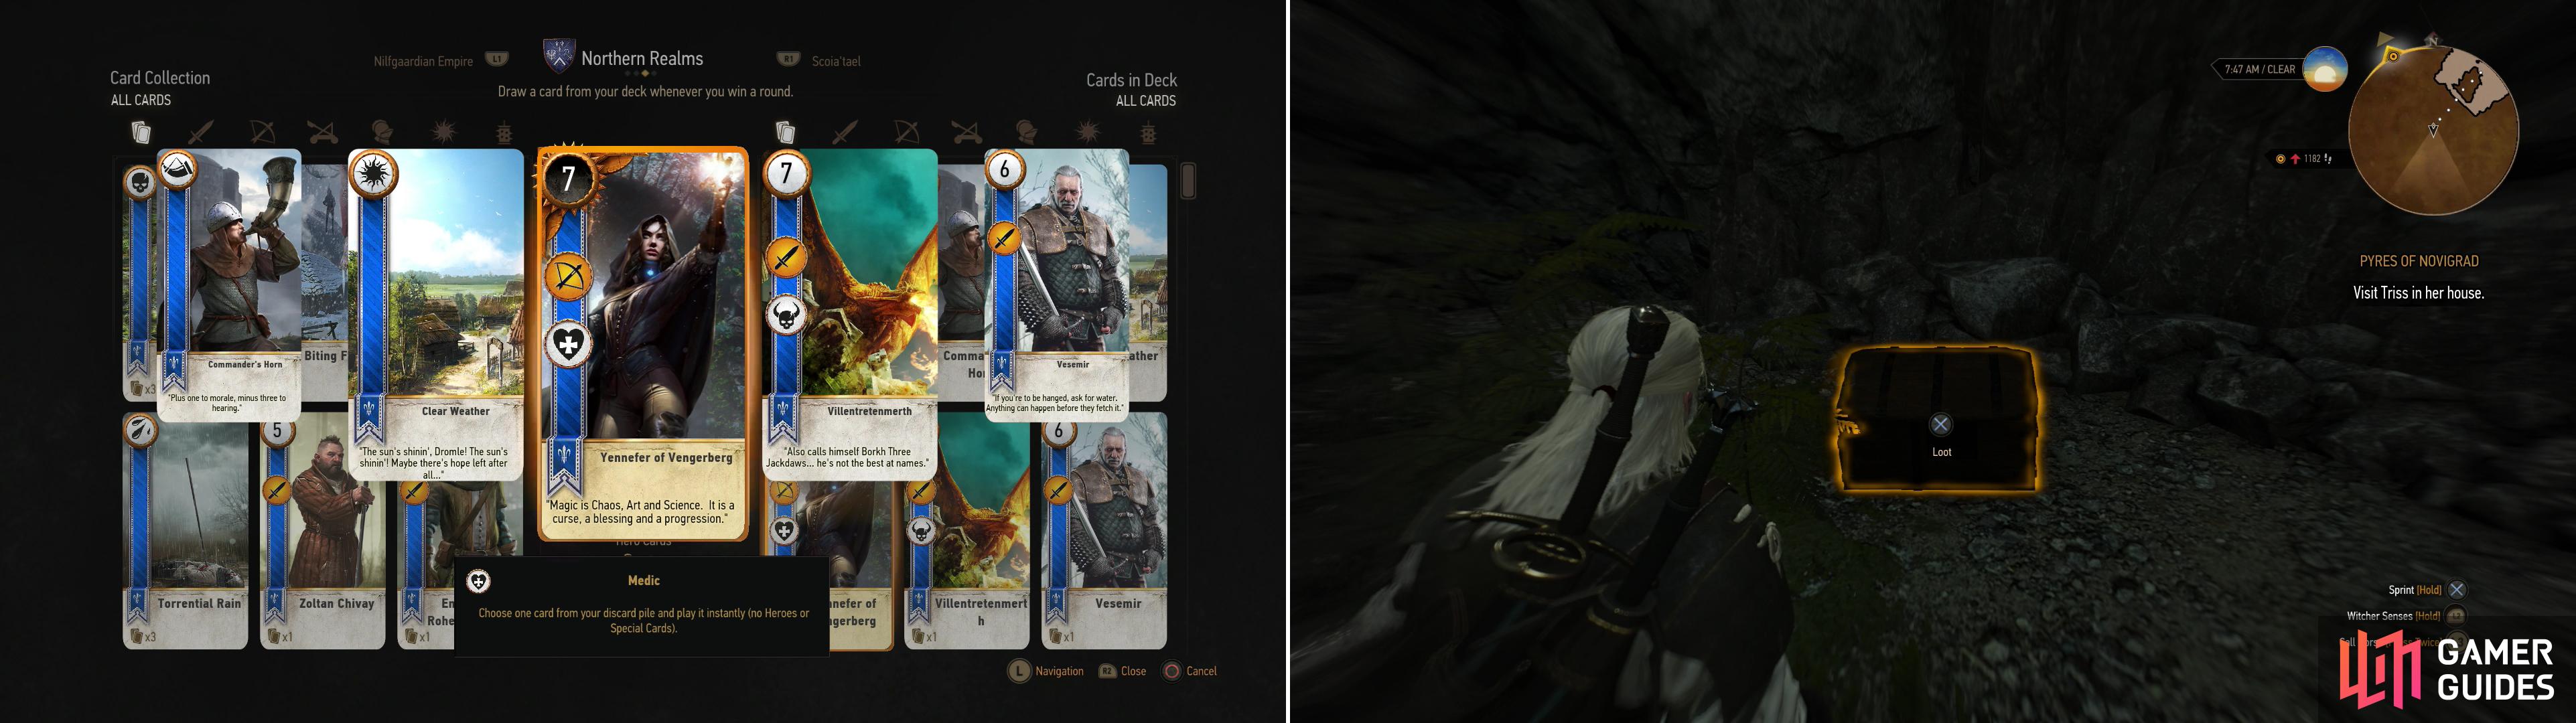 Defeat Stjepen to win the Yennefer of Vengerberg card (left). Seach Codger’s Quarry to find a chest containing the Diagram: Enhanced Feline Gauntlets (right).